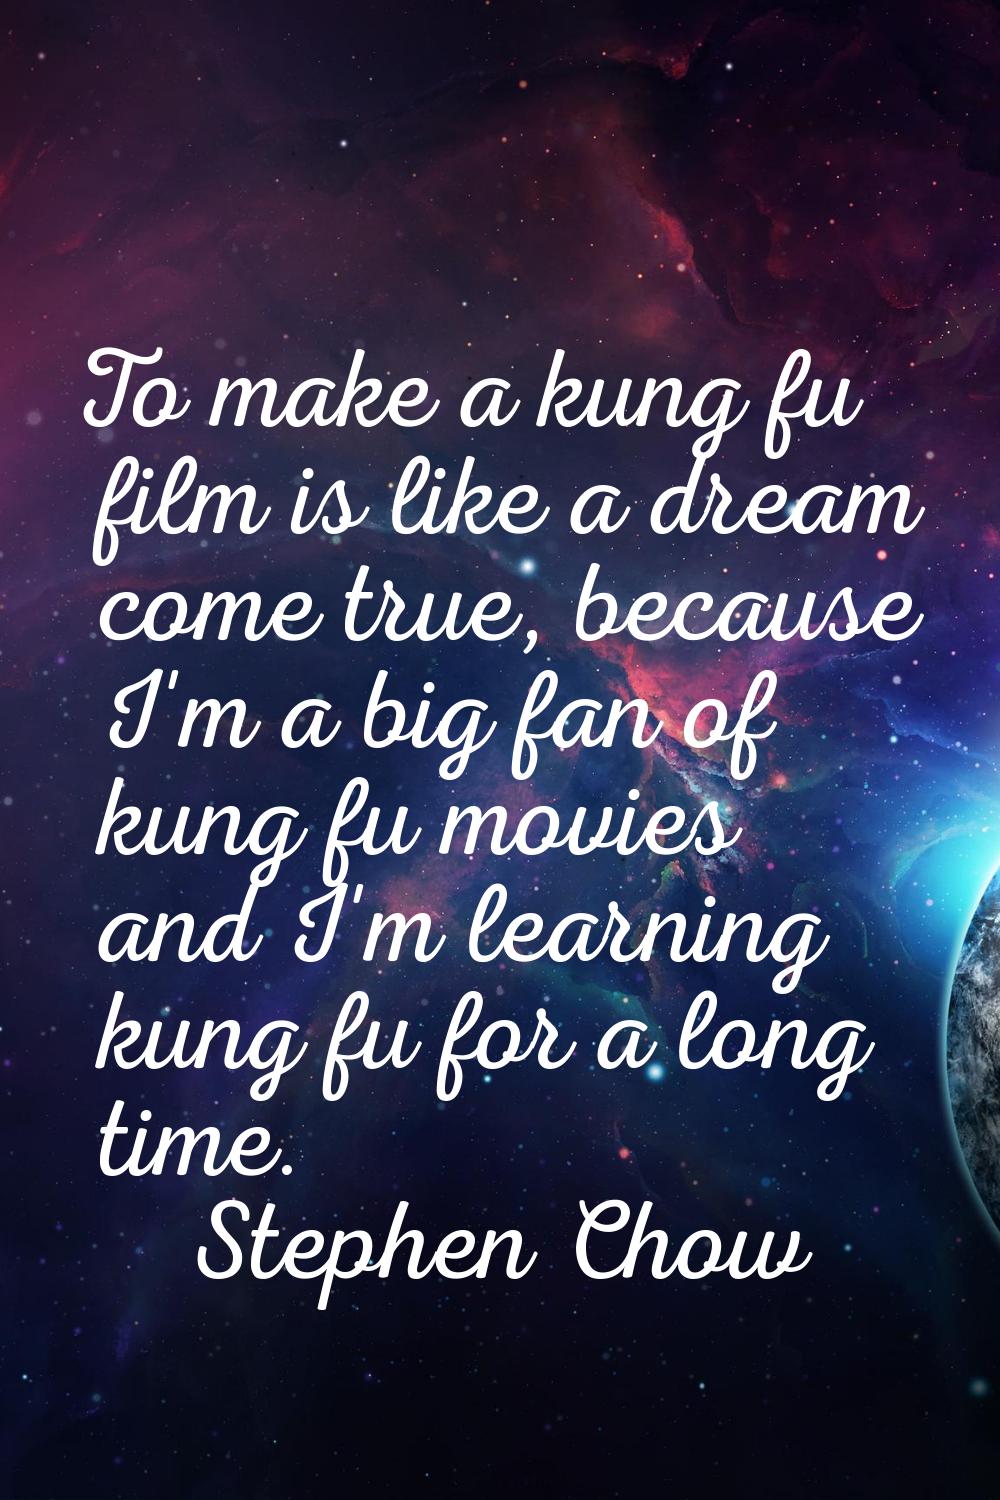 To make a kung fu film is like a dream come true, because I'm a big fan of kung fu movies and I'm l